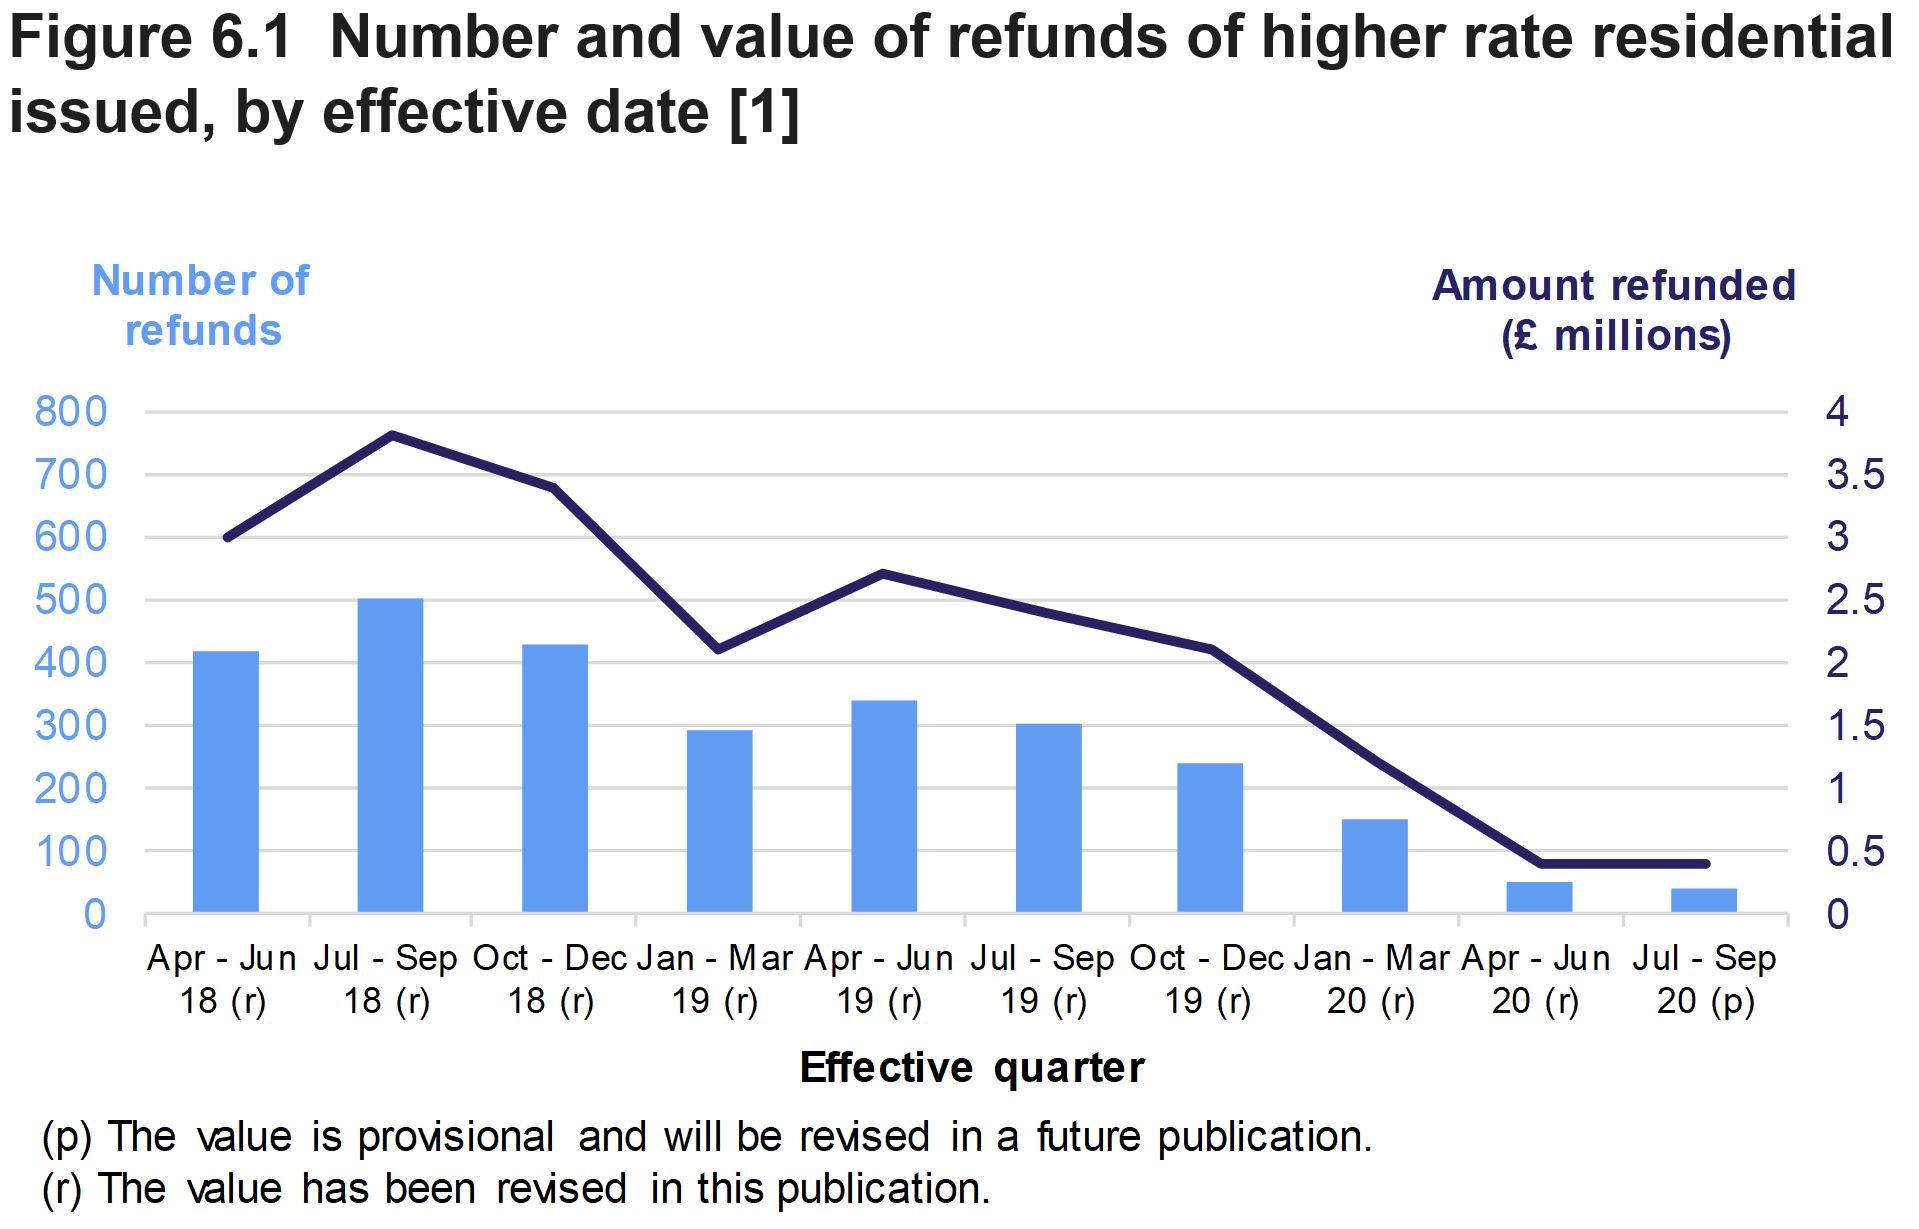 Figure 6.1 shows the number and value of refunds of higher rate residential issued, by quarter in which the original transaction was effective.